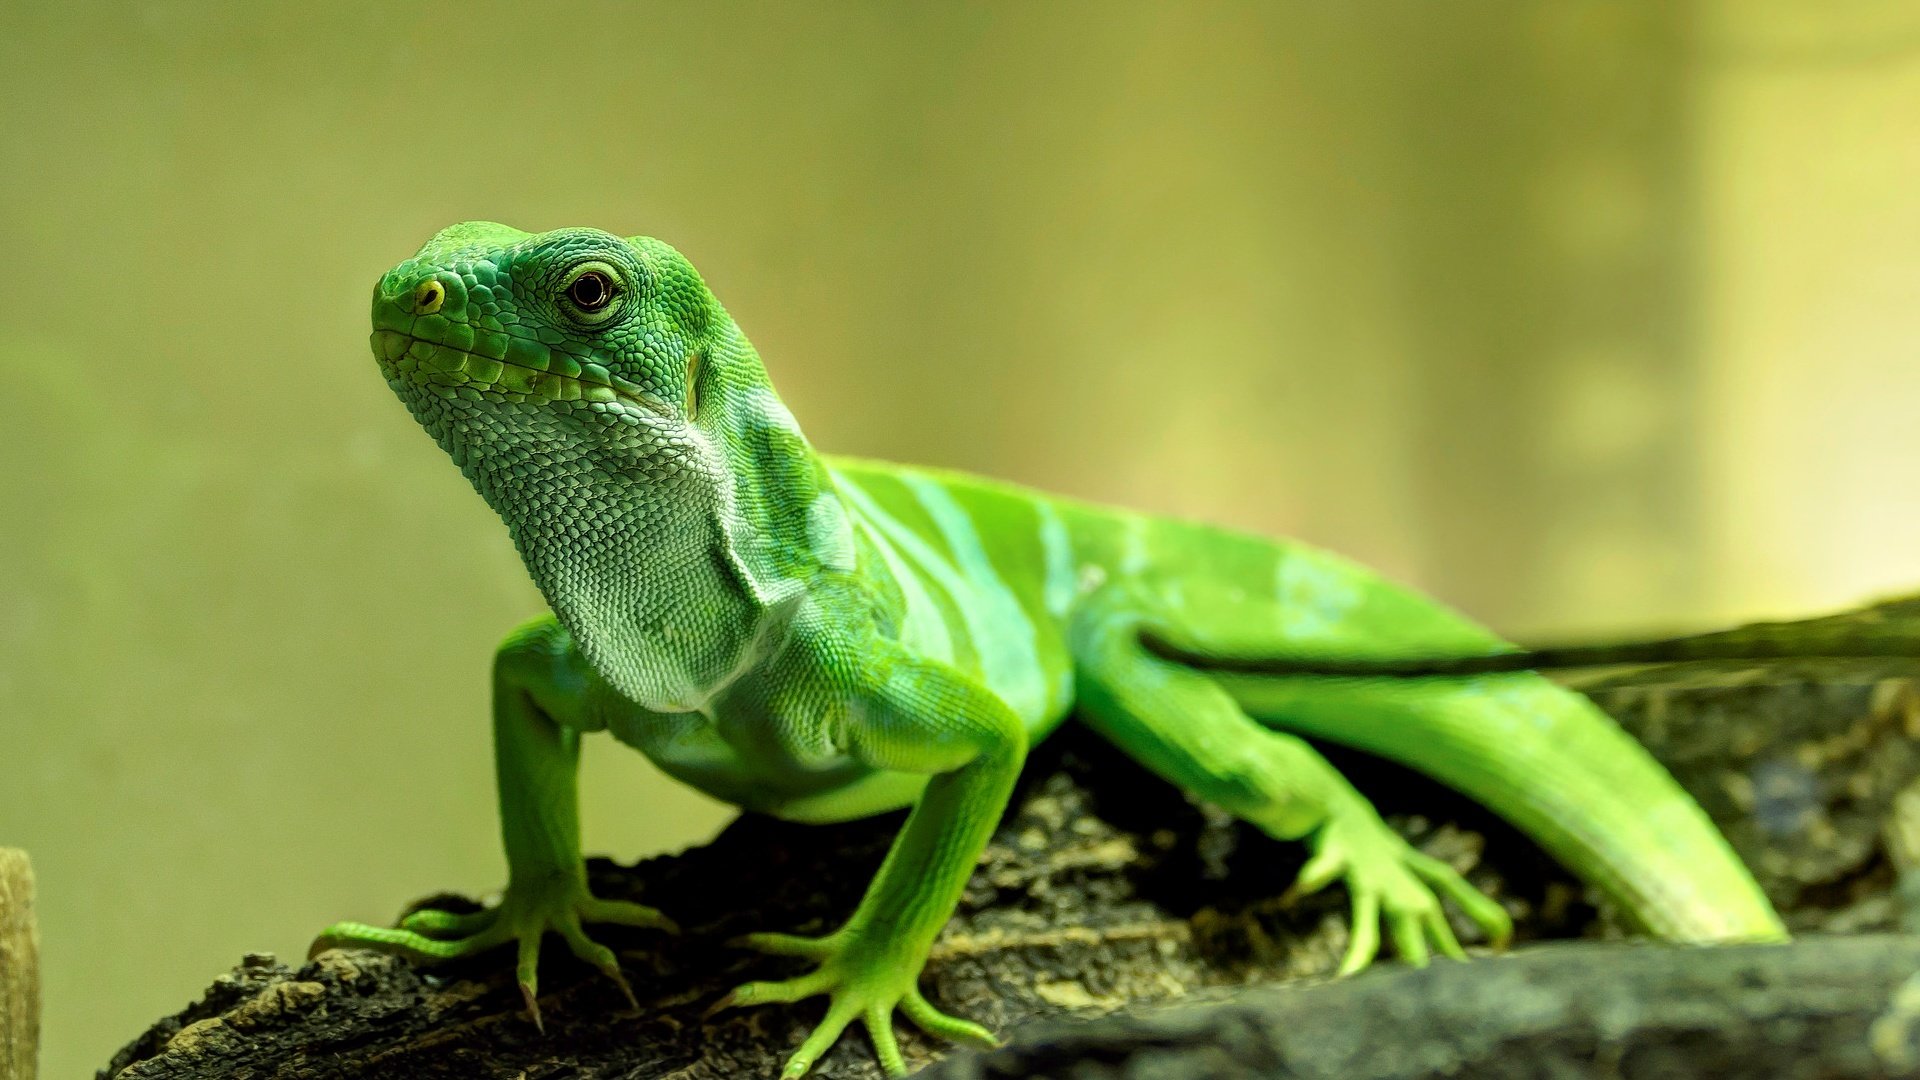 Download 1080p Lizard PC wallpaper ID:444025 for free